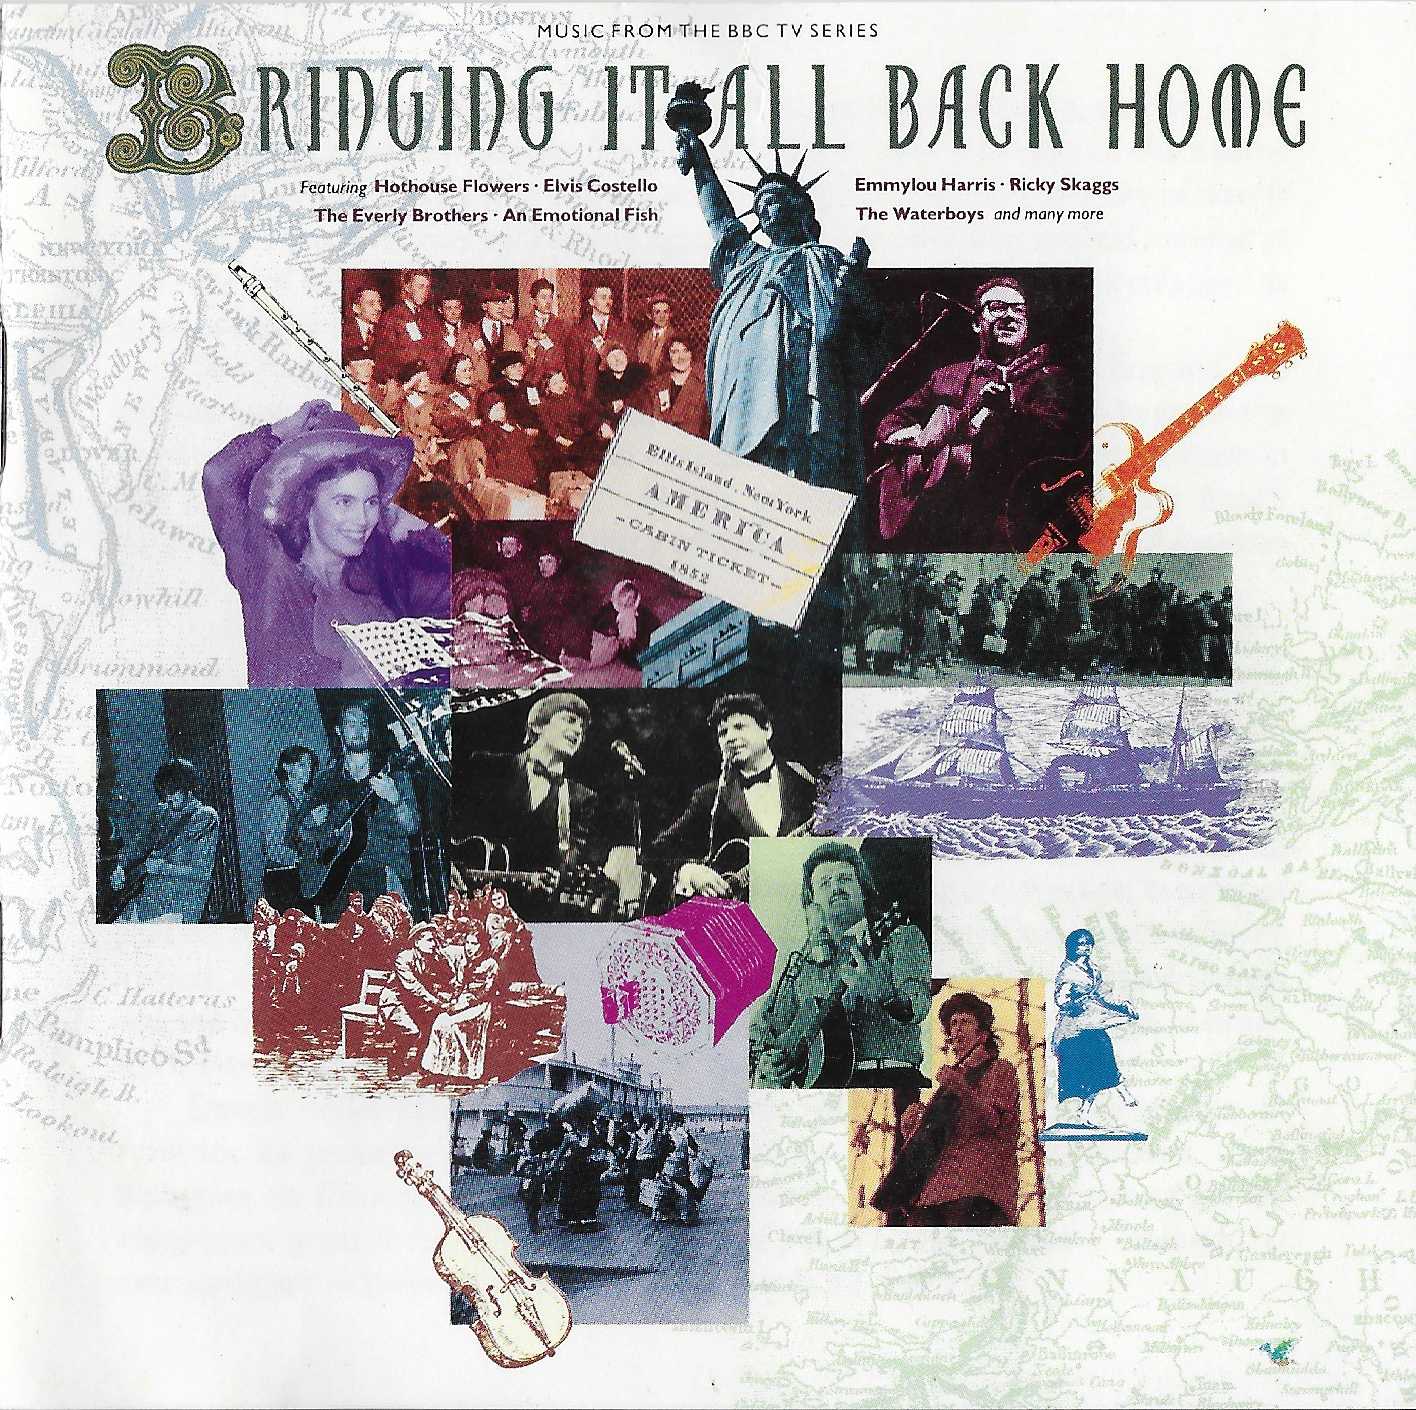 Picture of Bringing it all back home by artist Various from the BBC cds - Records and Tapes library